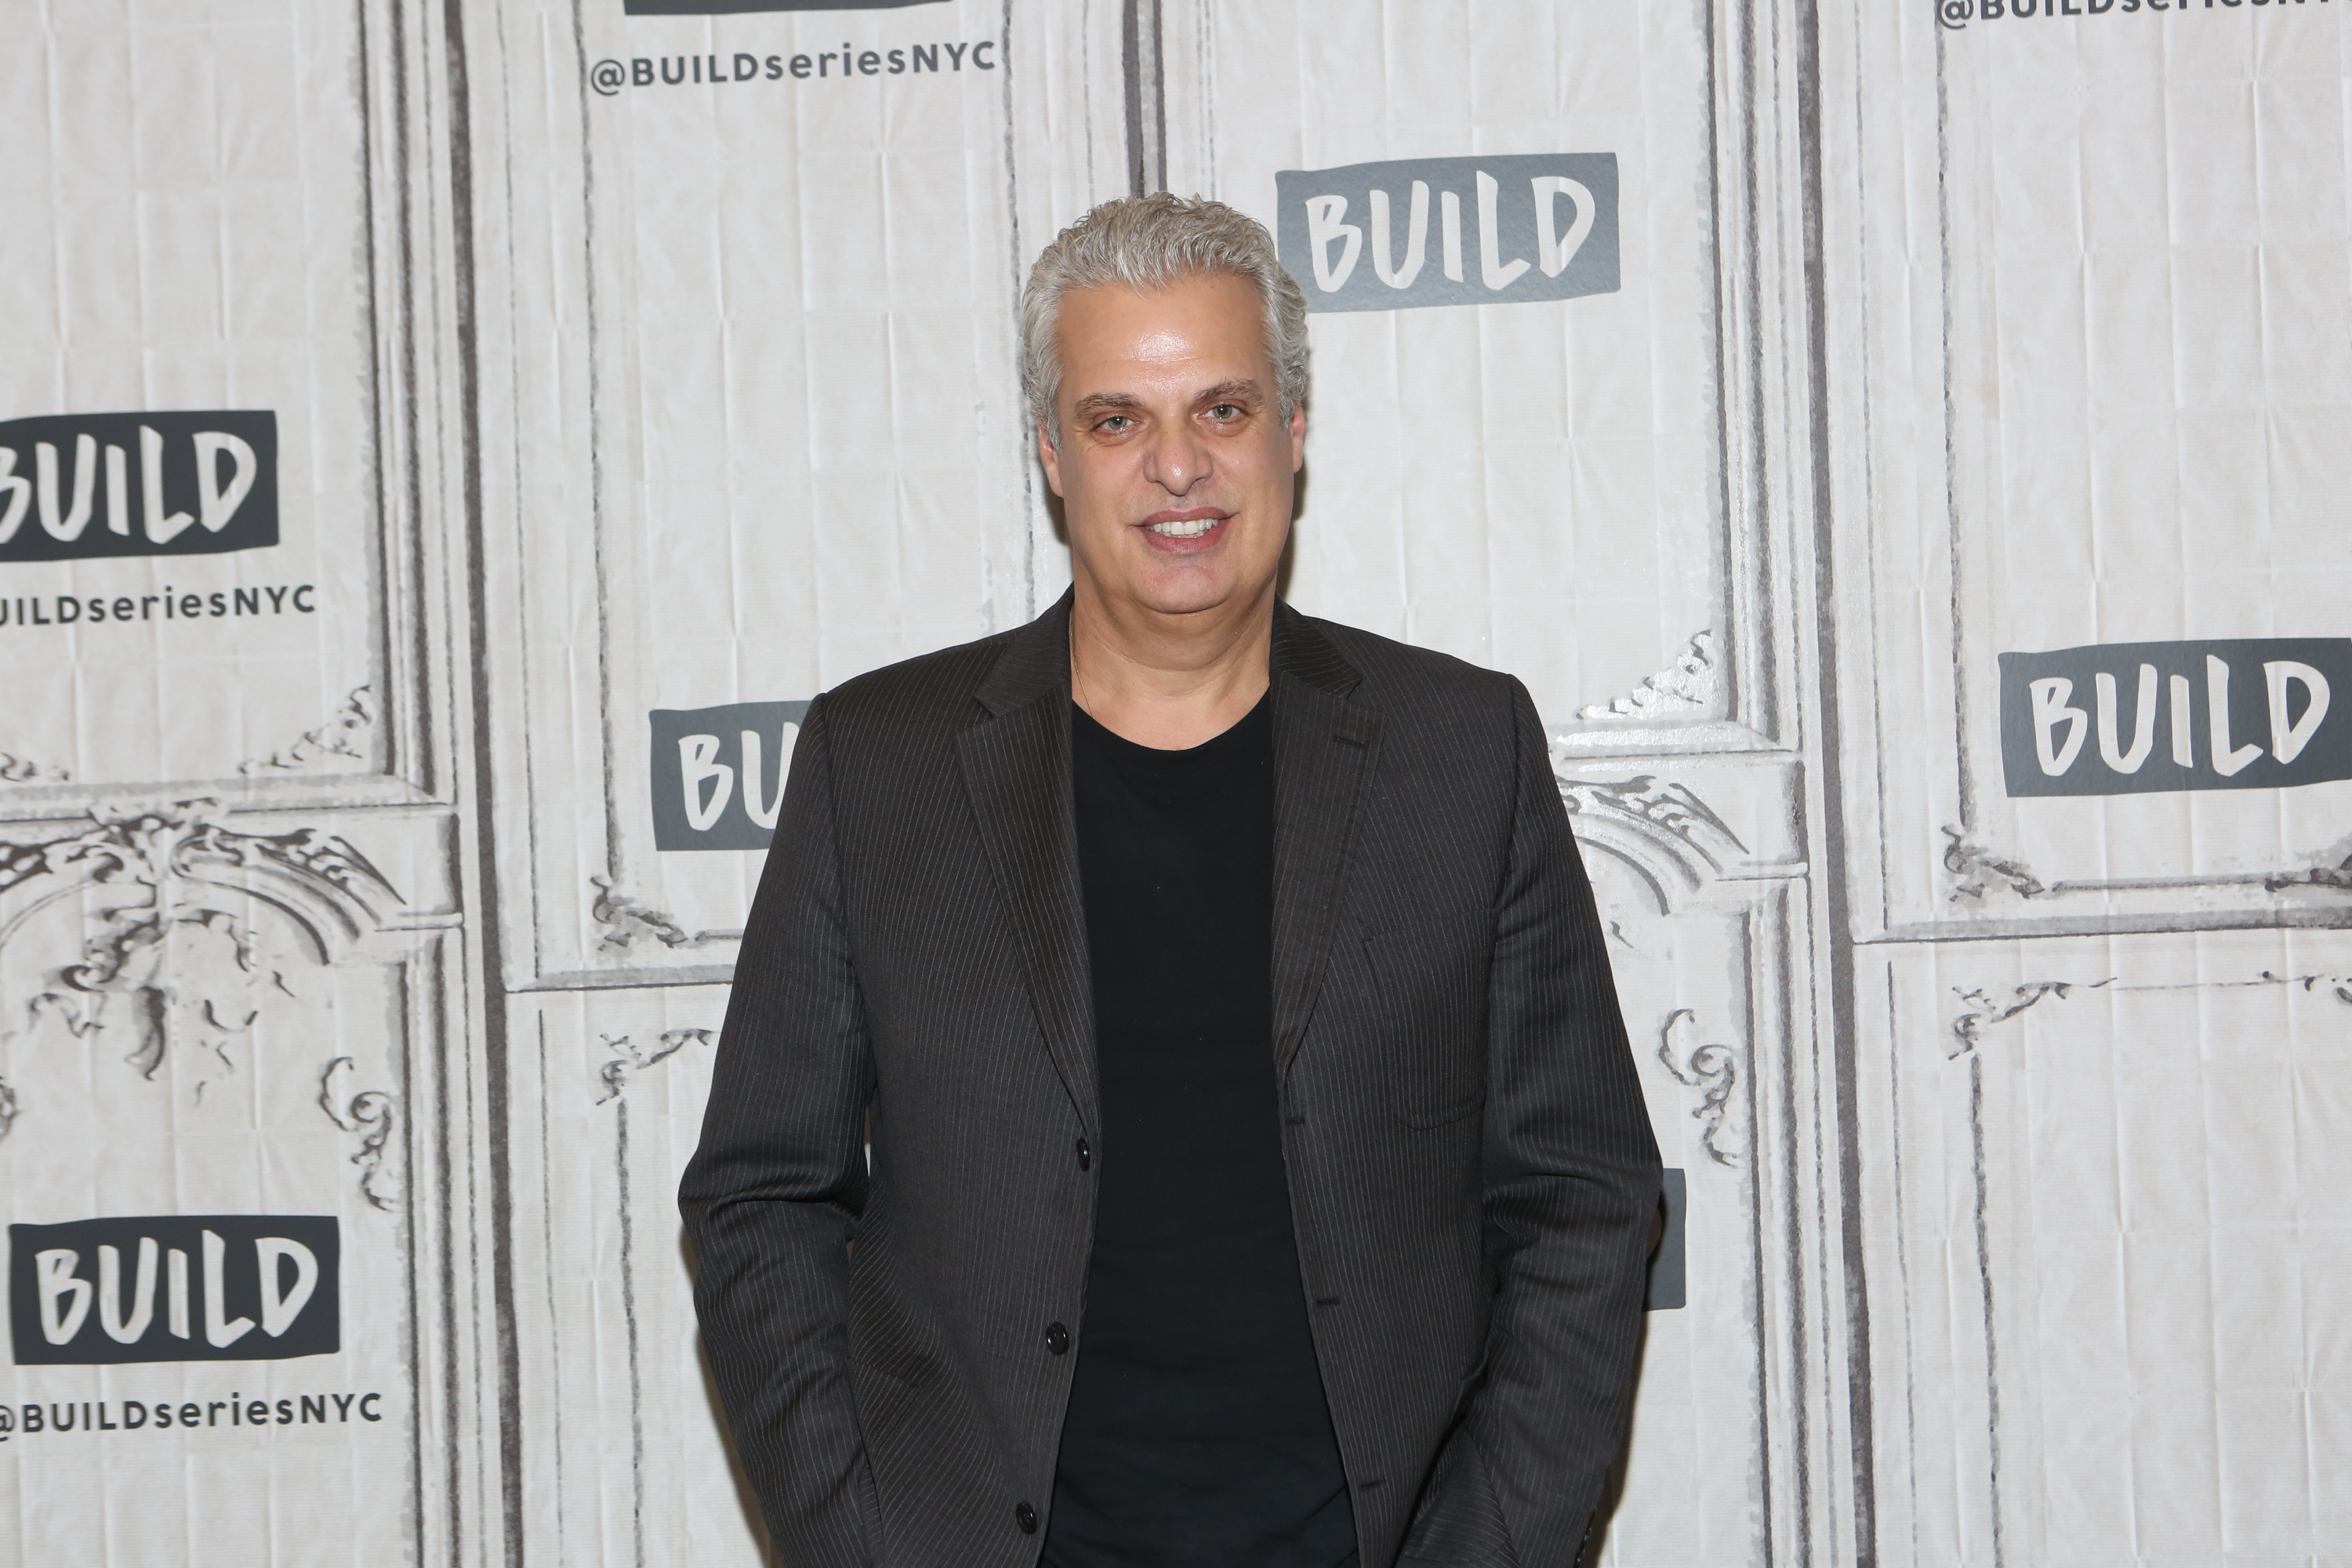 Chef Eric Ripert in a black t-shirt and jacket, standing and smiling at the camera.